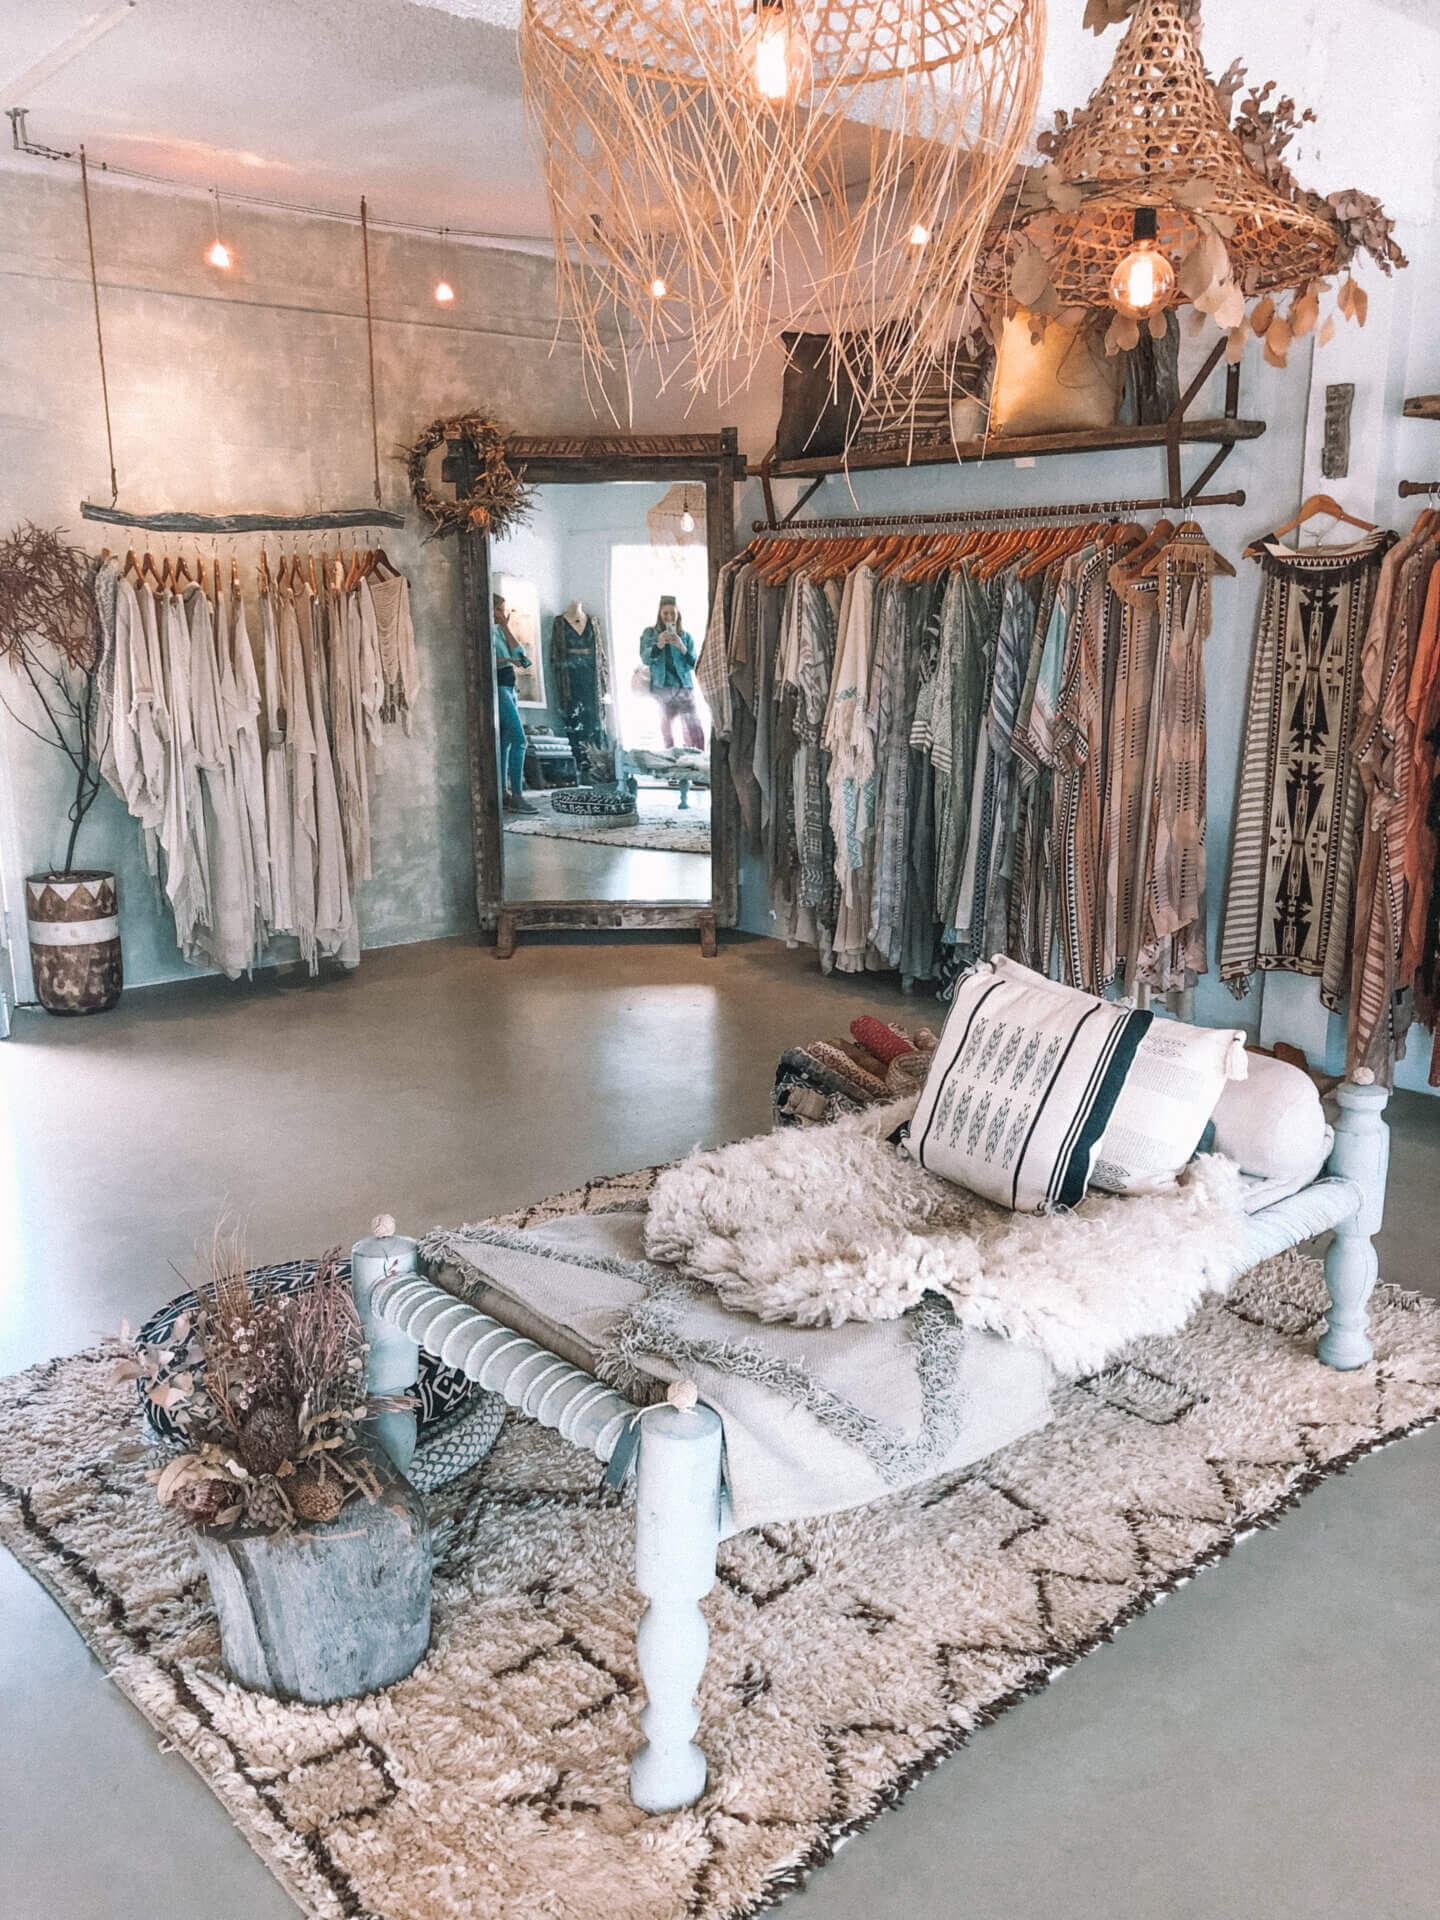 Inside The White Raven boutique in Mullumbimby NSW